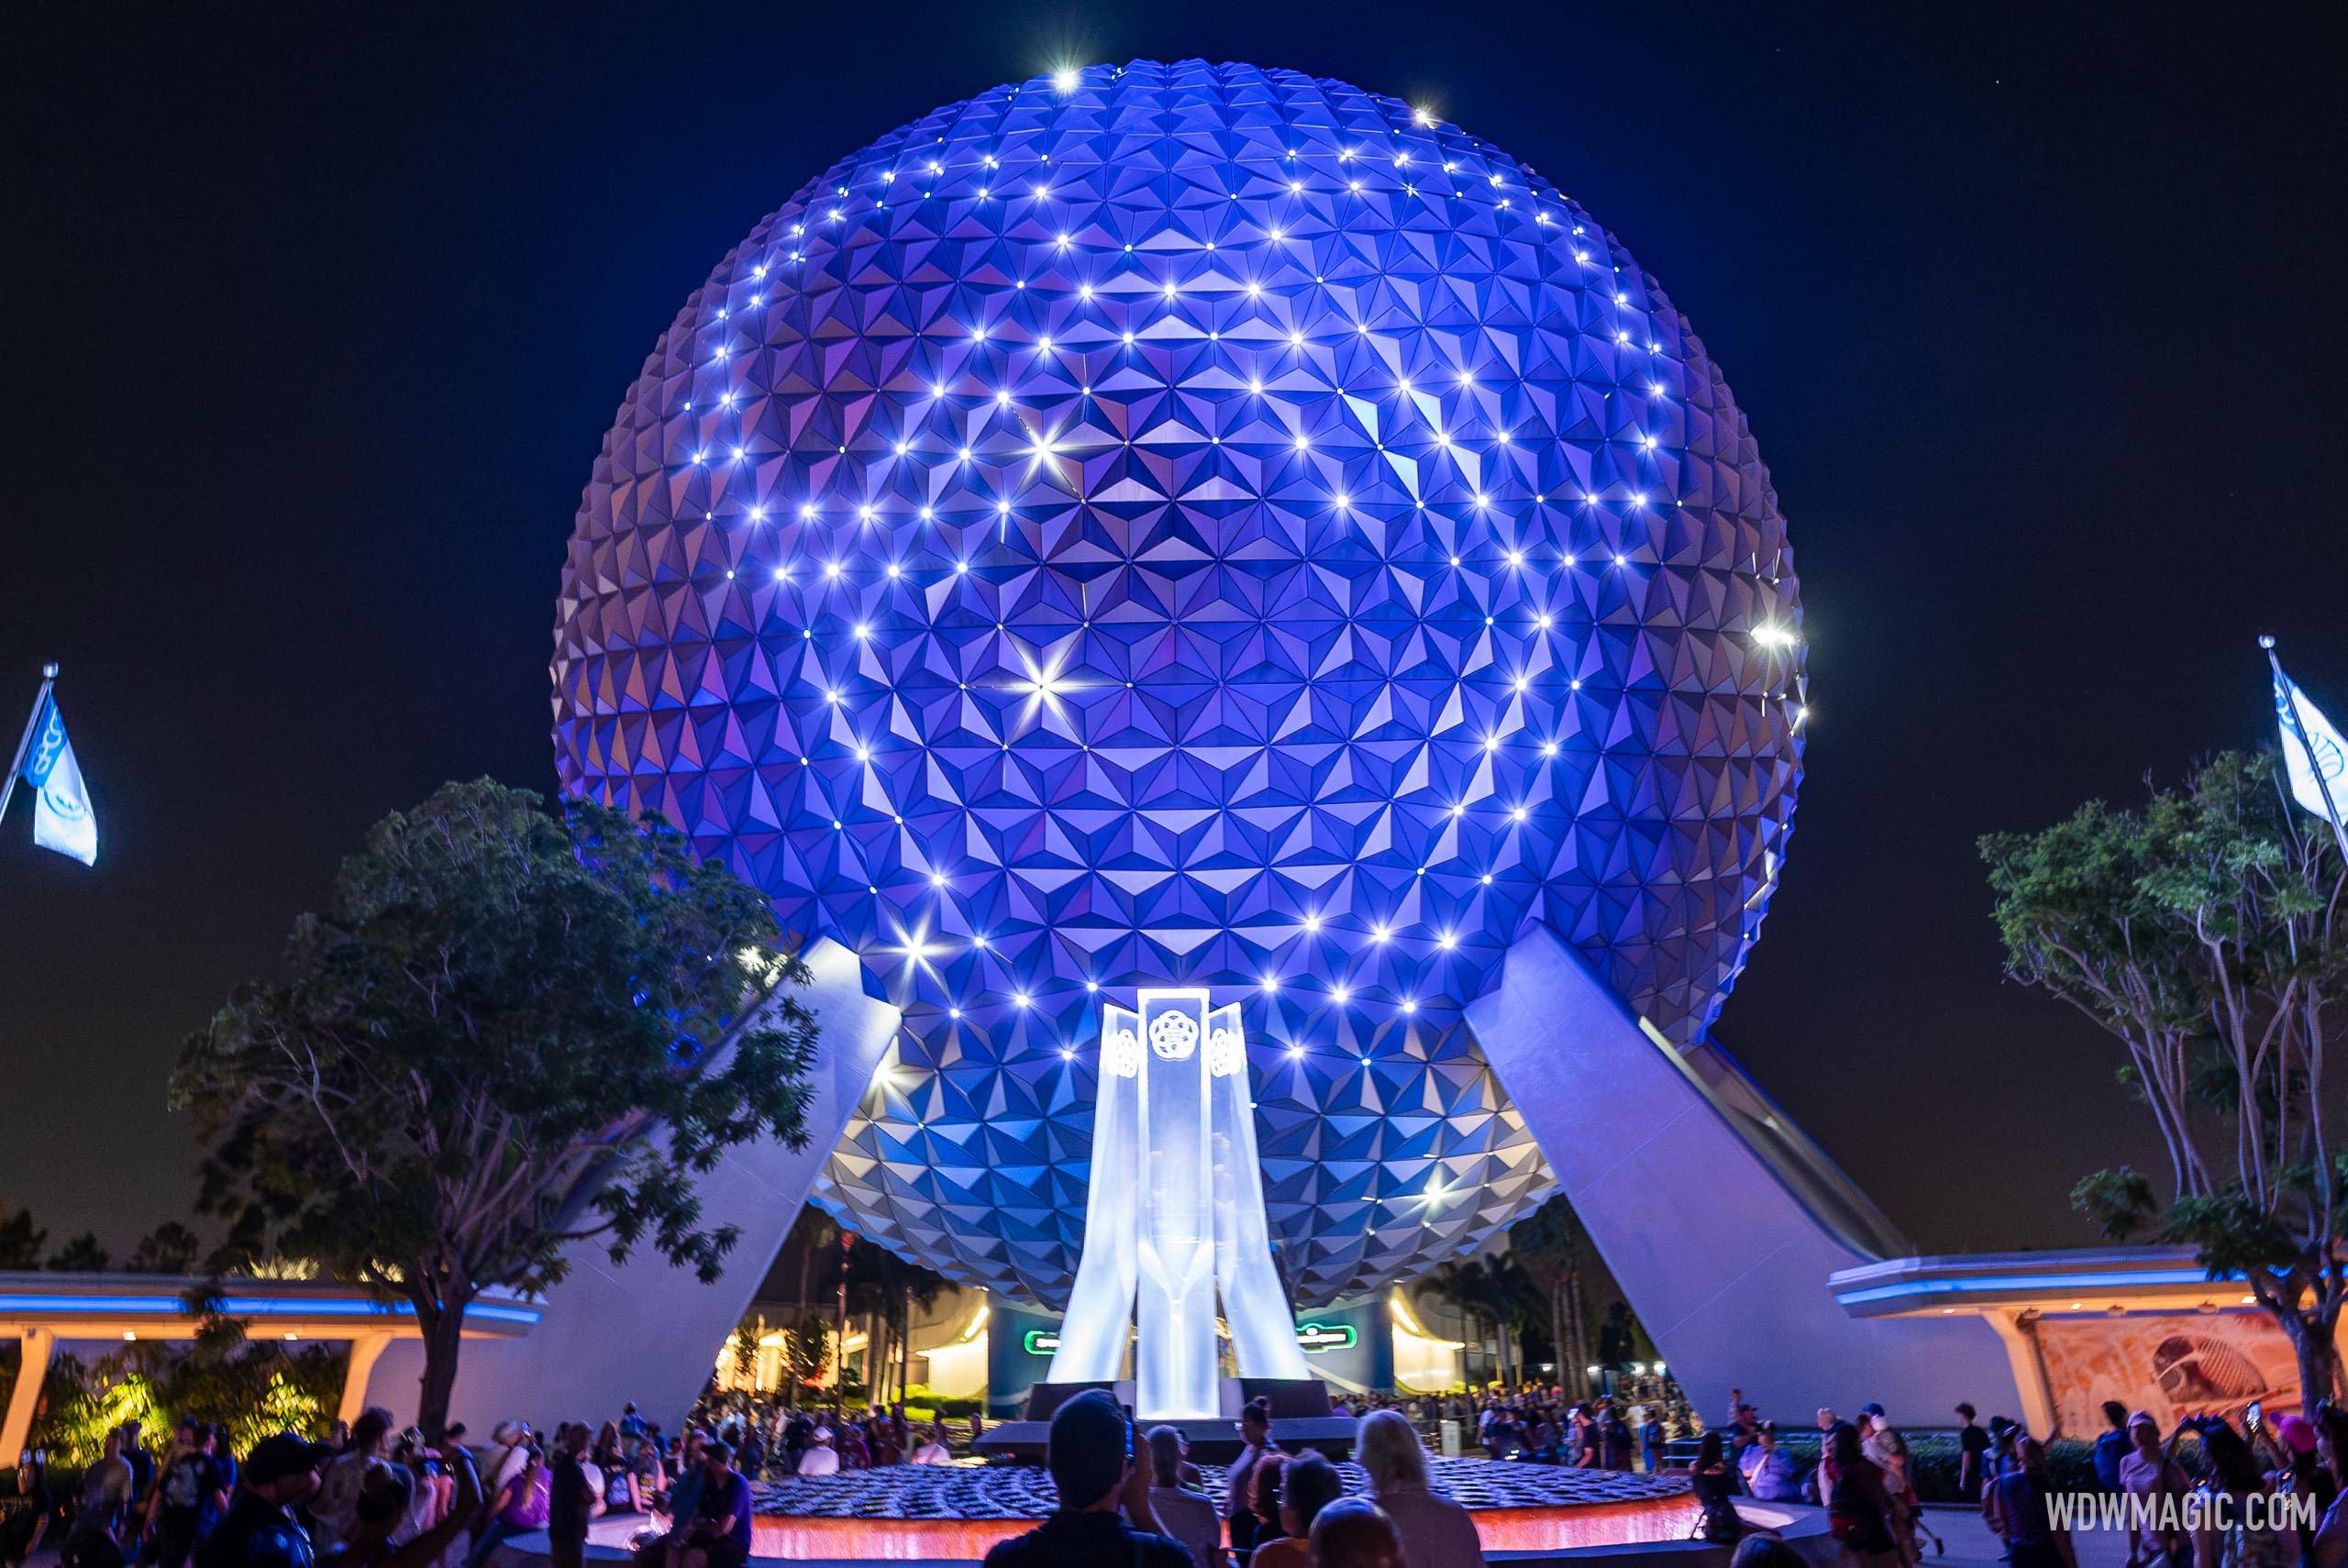 EPCOT's iconic Spaceship Earth illuminated by new light show for Disney100 celebration